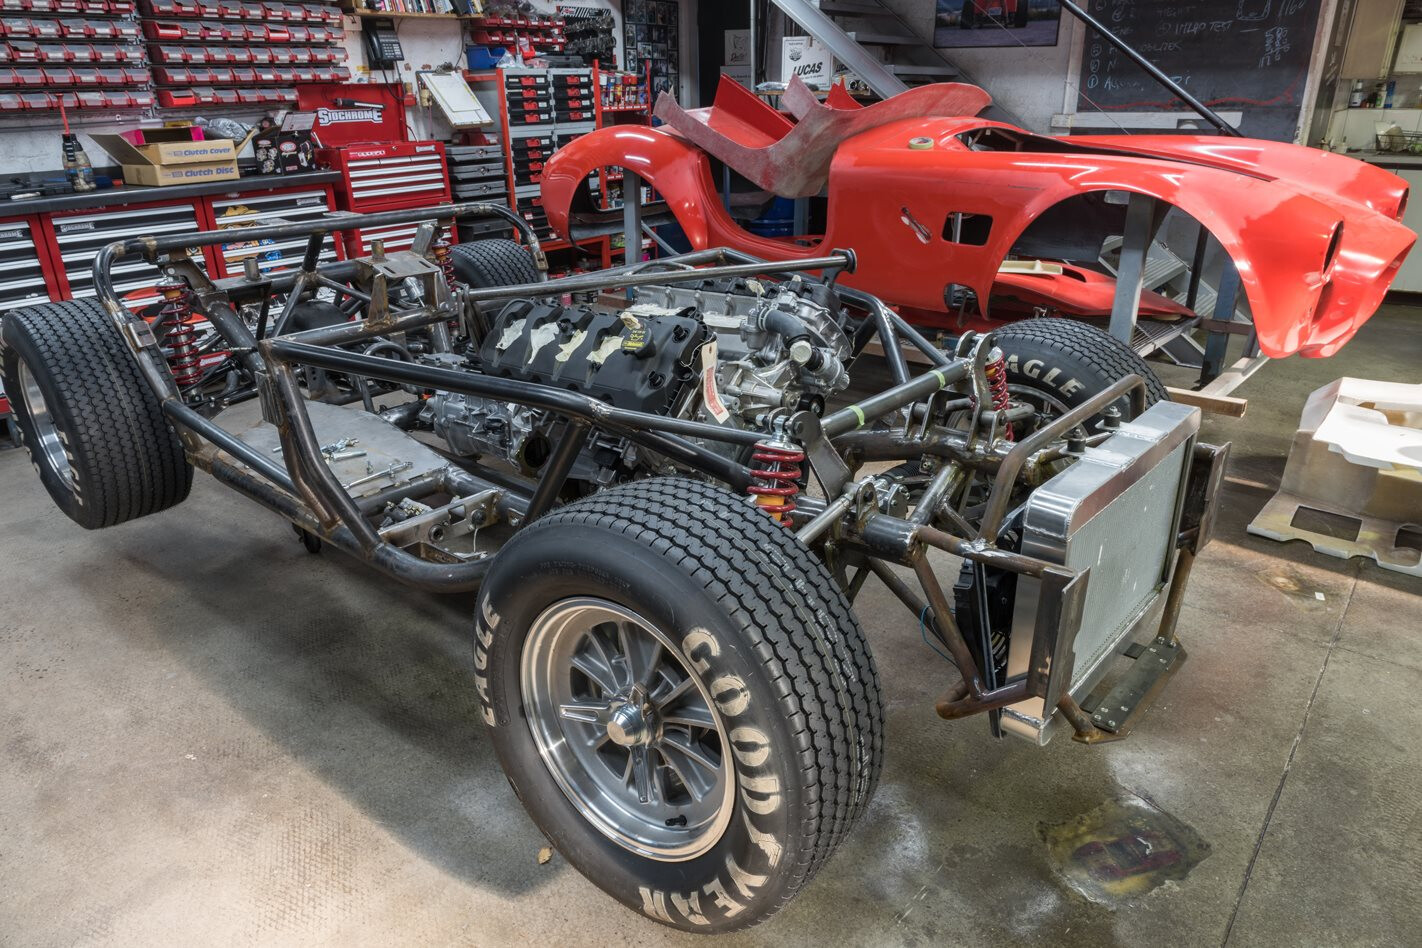 SIDCHROME PROJECT COBRA: BODY MEETS CHASSIS